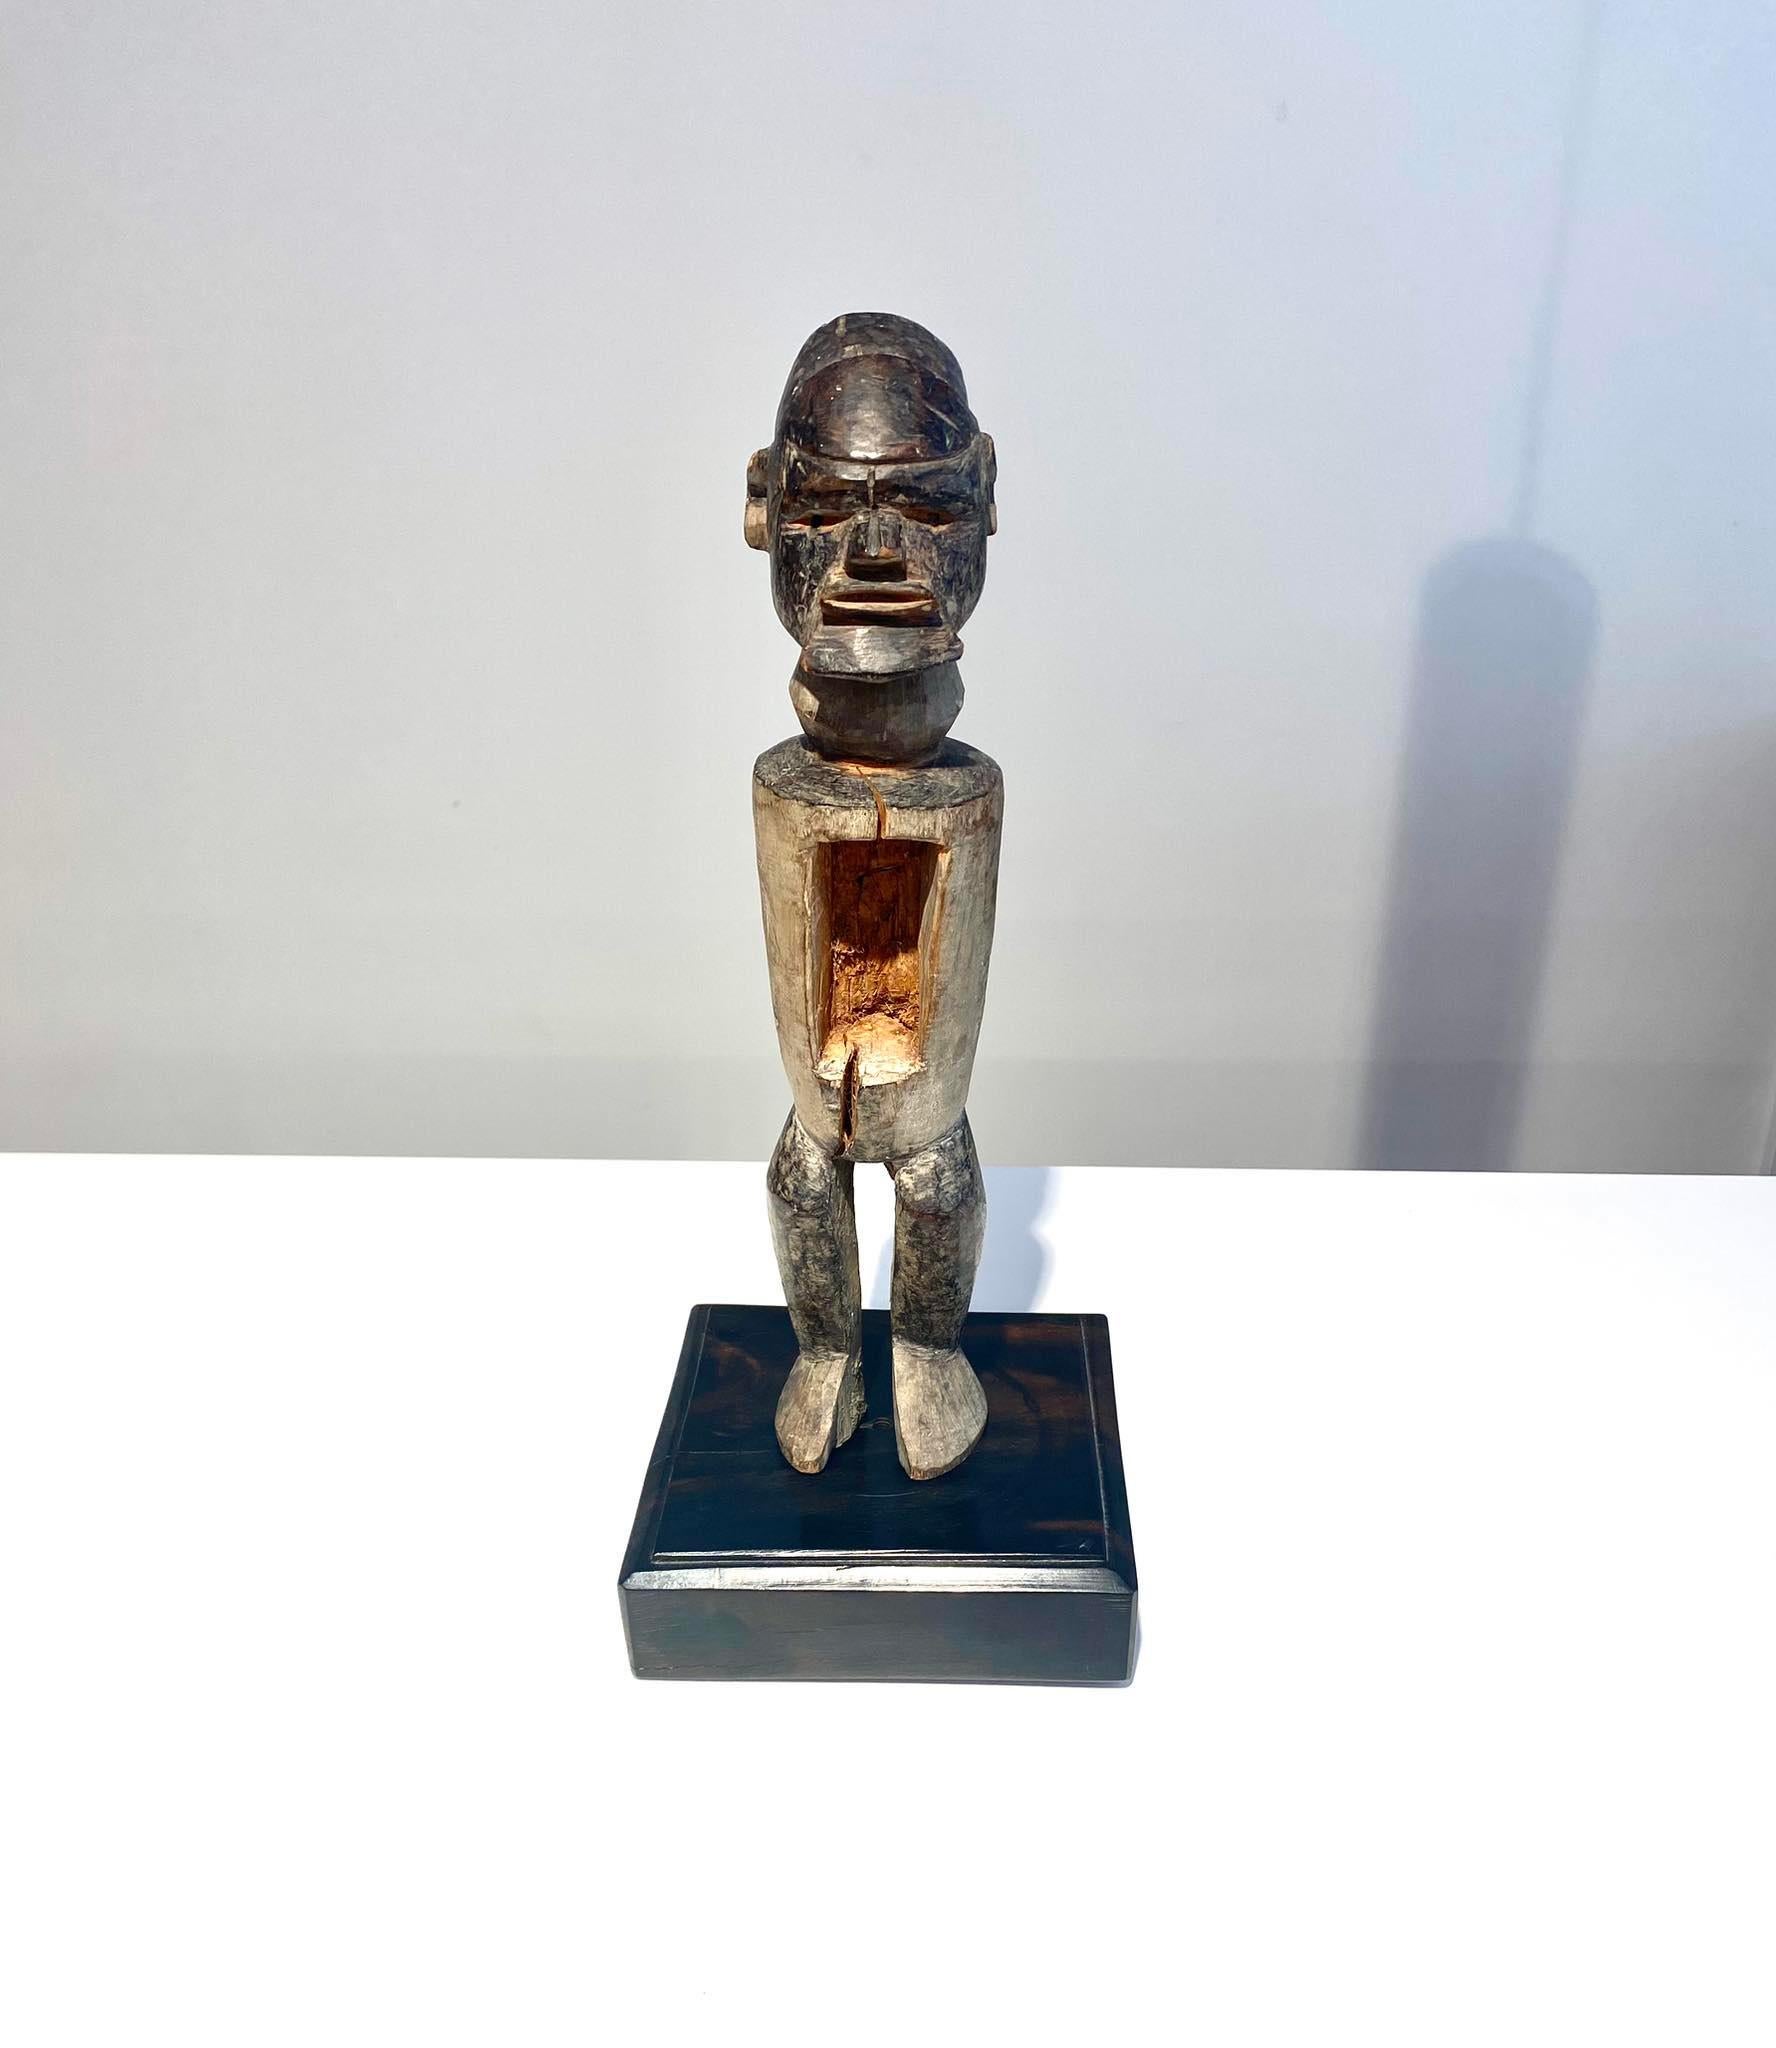 Rare and beautiful antique Teke powerful statue RD Congo in Cubist style (see pictures).
Situated DR Congo / Congo Brazzaville Malebo Pool area Central Africa
Height: 31cm
Early 20th century (around 1900- 1920).
Superb and rare exceptional piece of